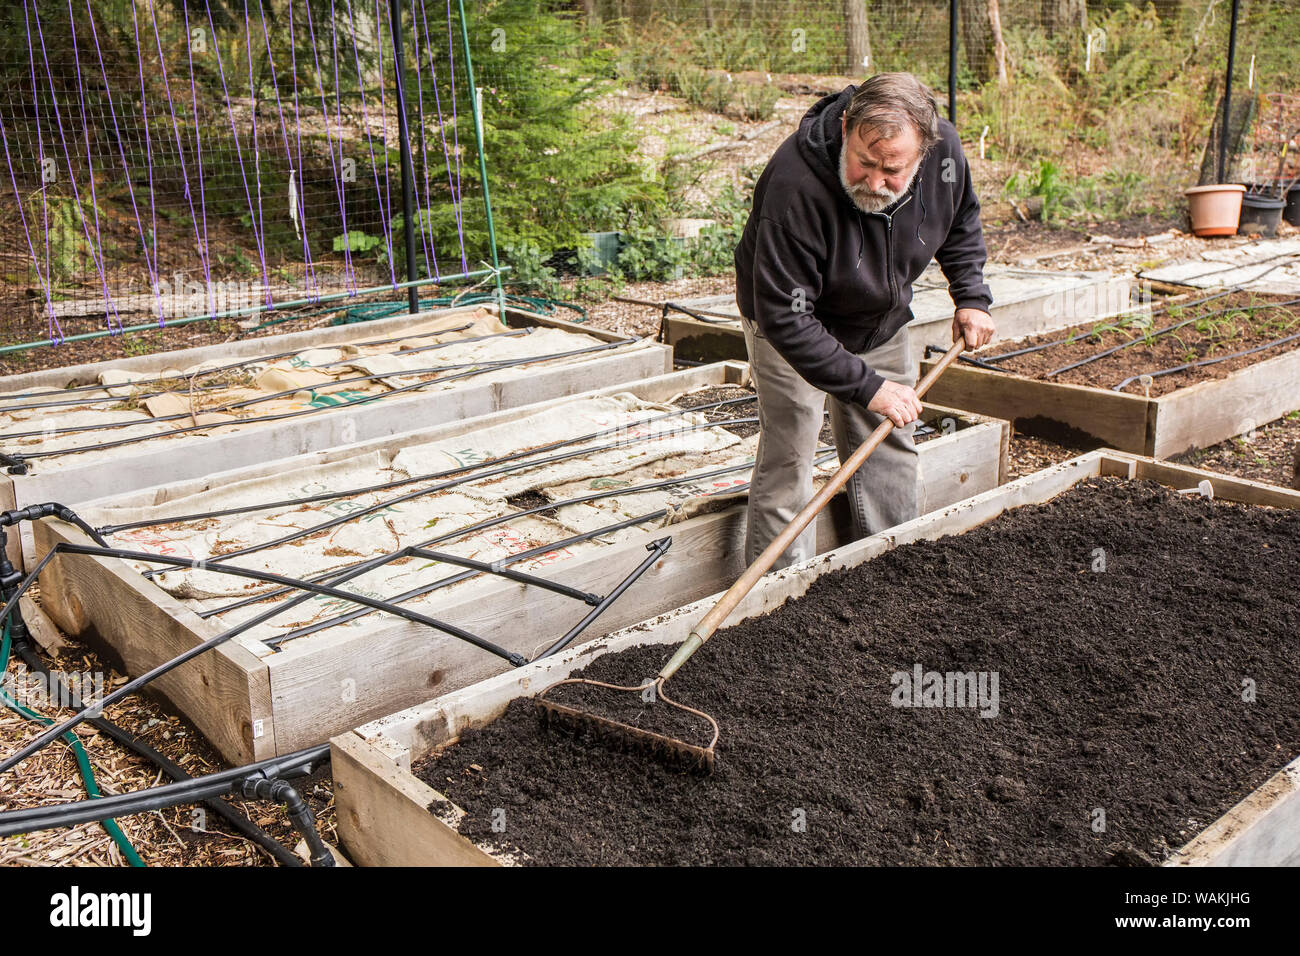 Issaquah, Washington State, USA. Man using a garden rake to level a freshly composted raised garden bed. (MR, PR) Stock Photo